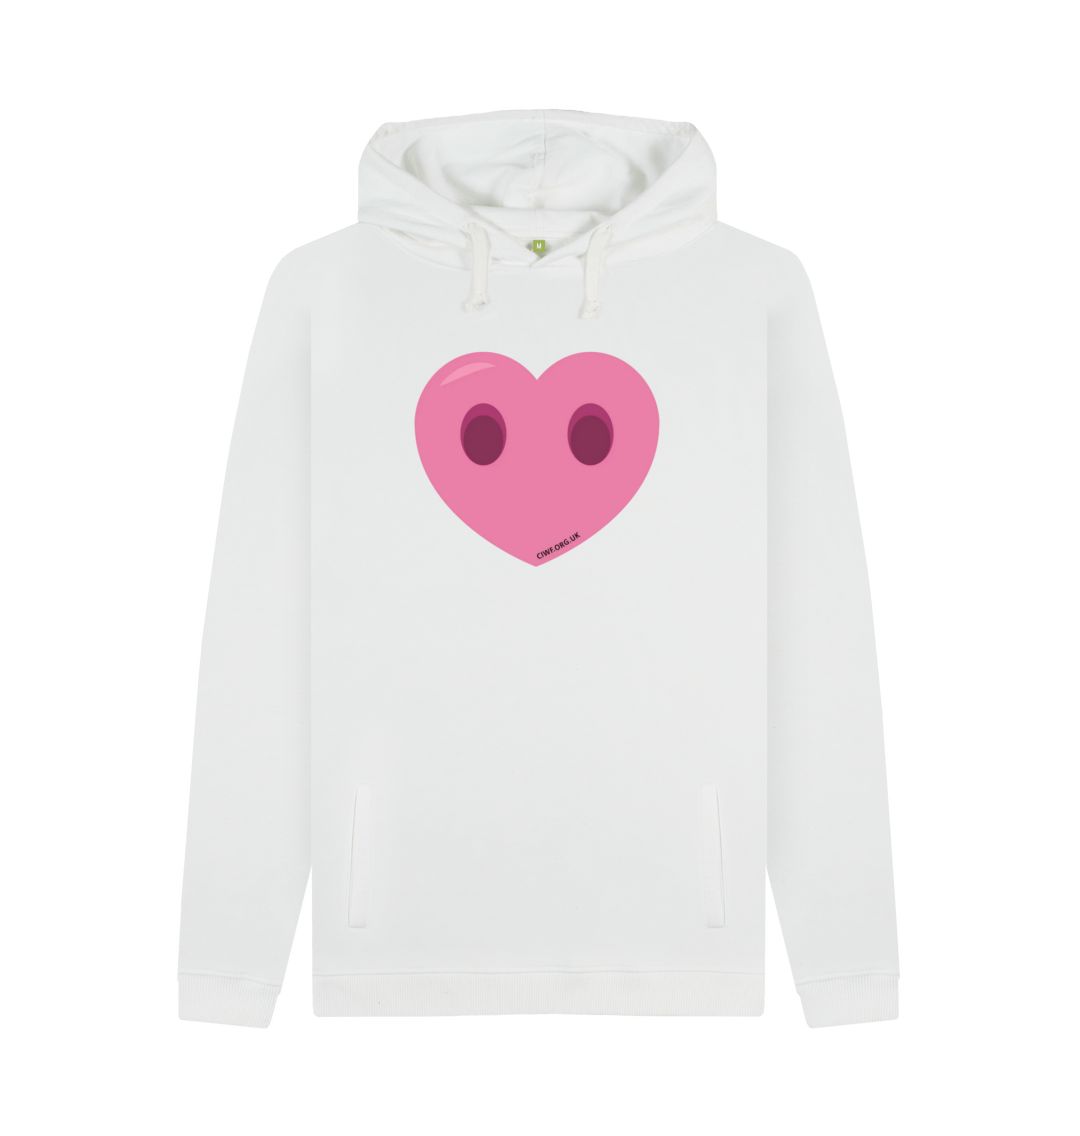 White Men's Compassion Heart Hoodie